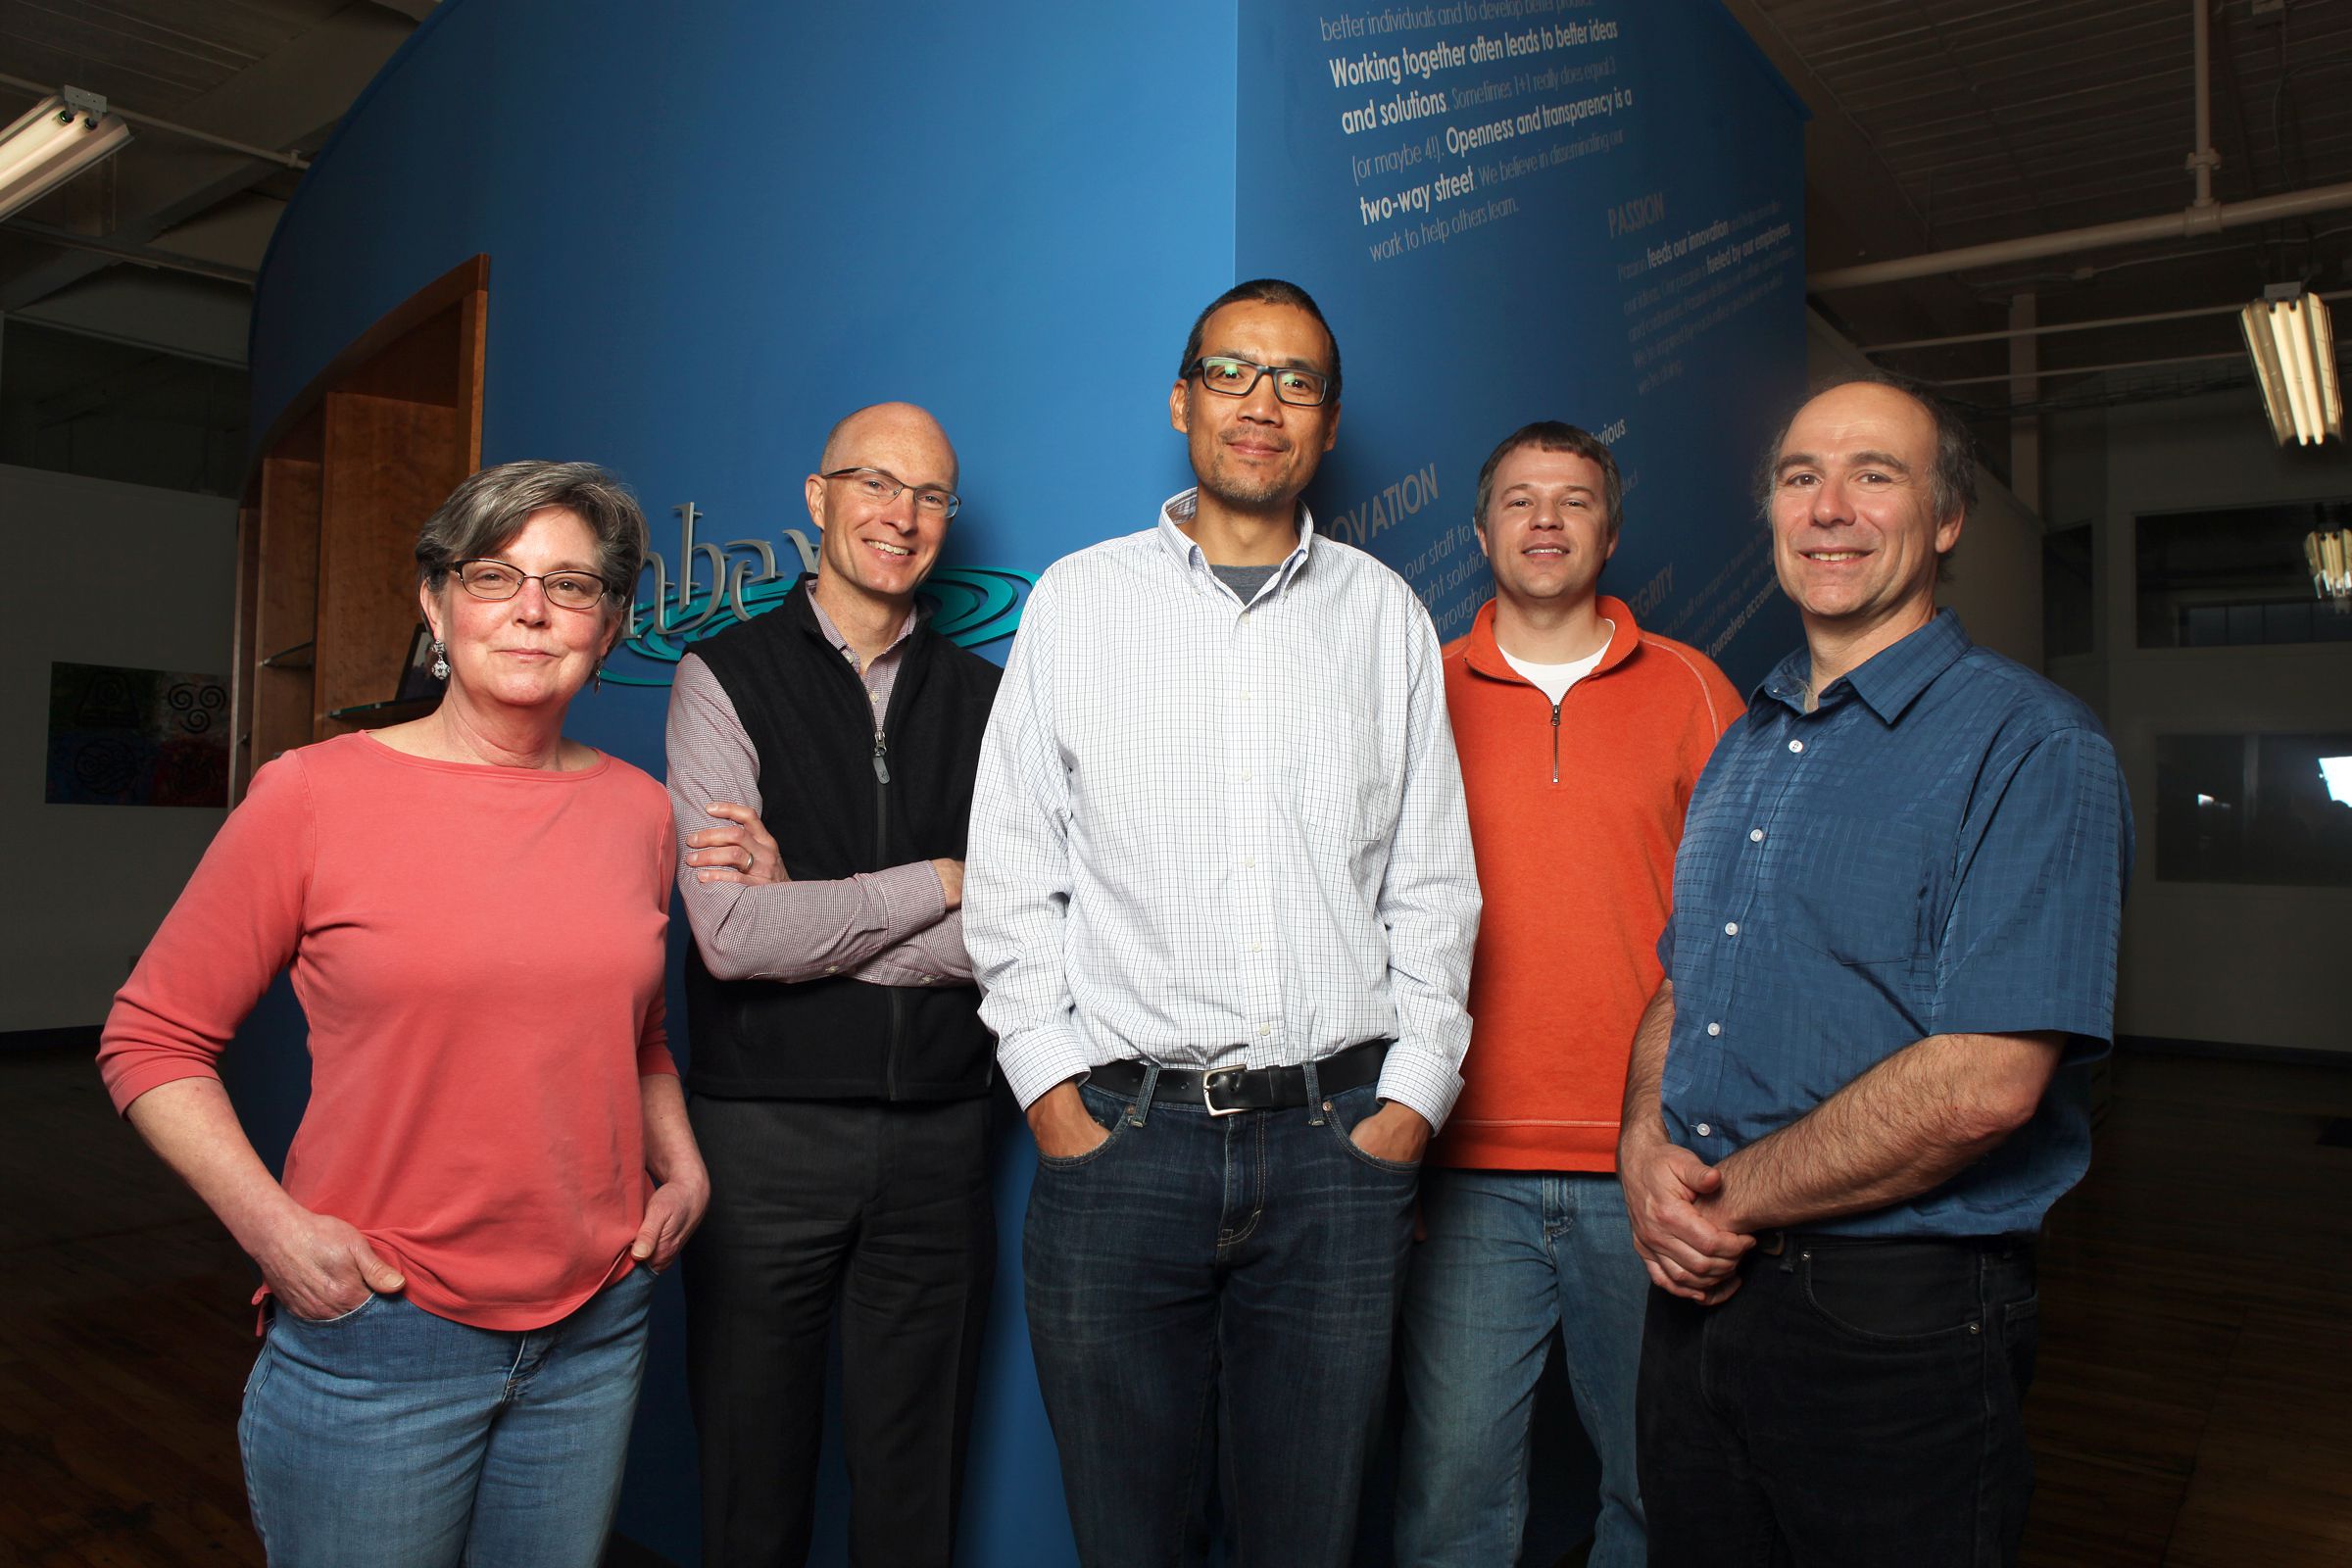 The Simbex leadership team -- business manager Theresa Hays, left, chief business development officer Greg Lange, chief technology officer Jeffrey Chu, vice president of research and development Jonathan Beckwith, and CEO and co-founder Richard Greenwald -- on Thursday, May 11, 2017, in Lebanon, N.H. (Valley News - Jovelle Tamayo) Copyright Valley News. May not be reprinted or used online without permission. Send requests to permission@vnews.com.